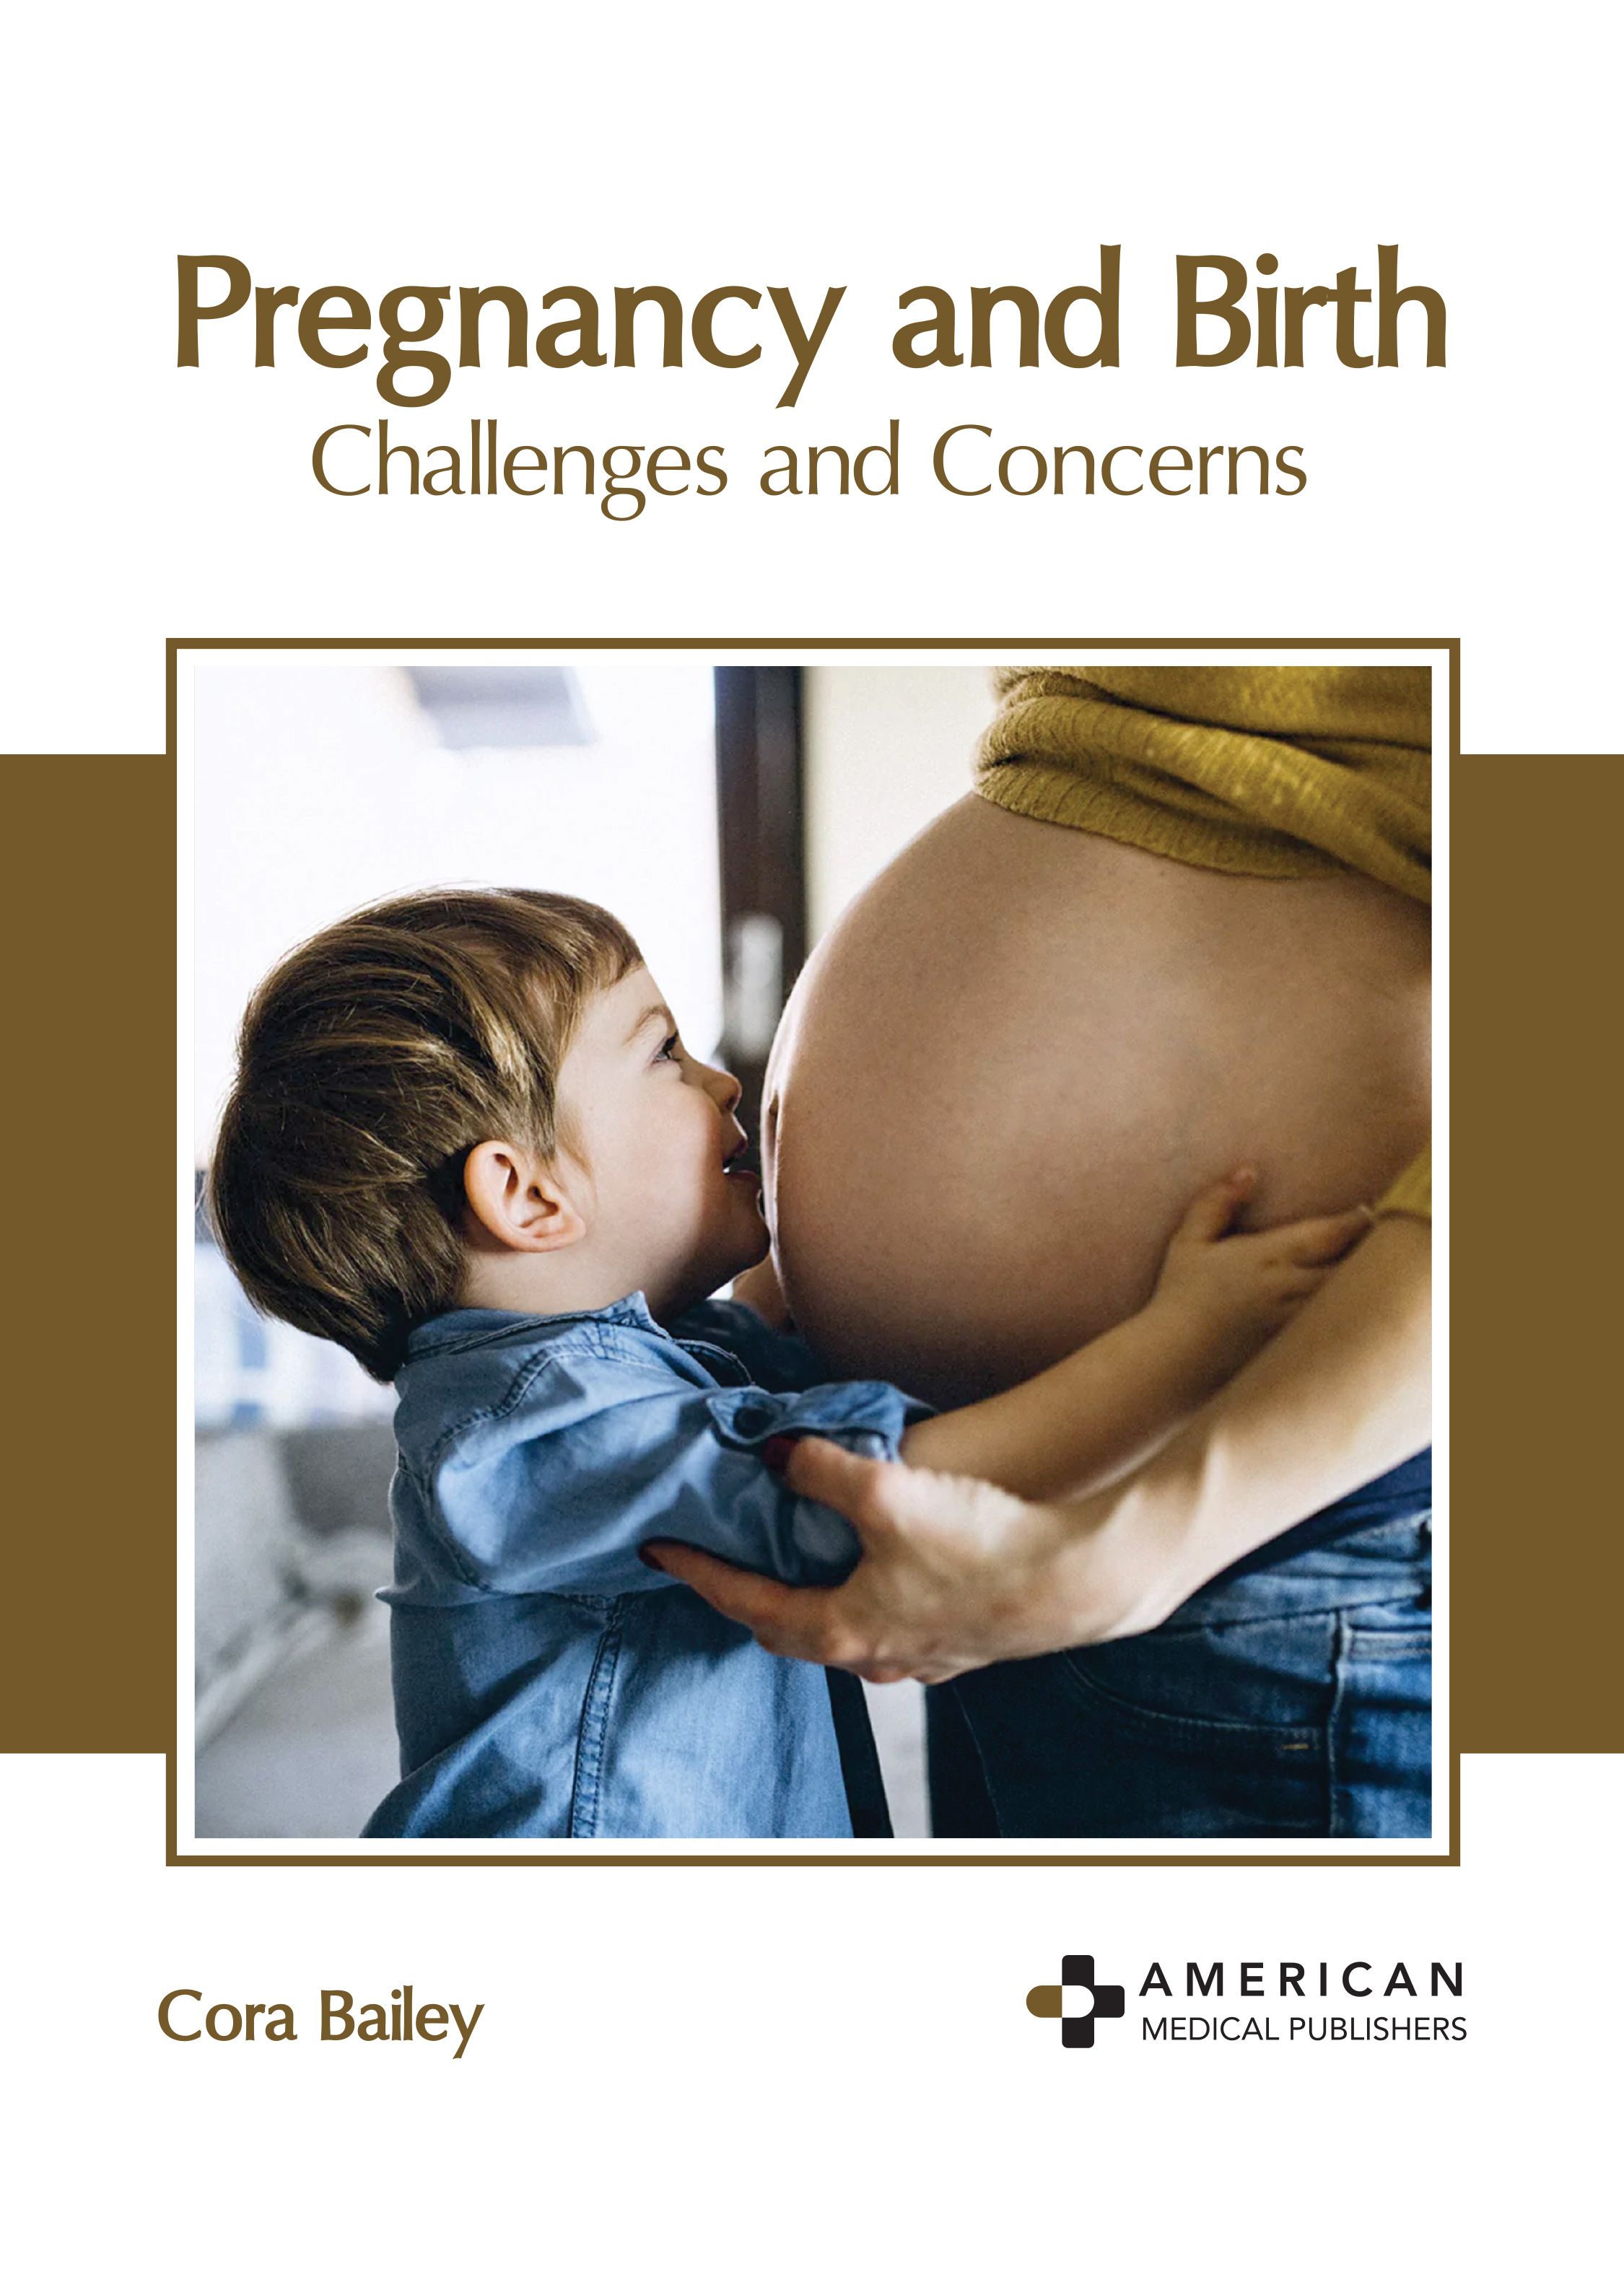 PREGNANCY AND BIRTH: CHALLENGES AND CONCERNS